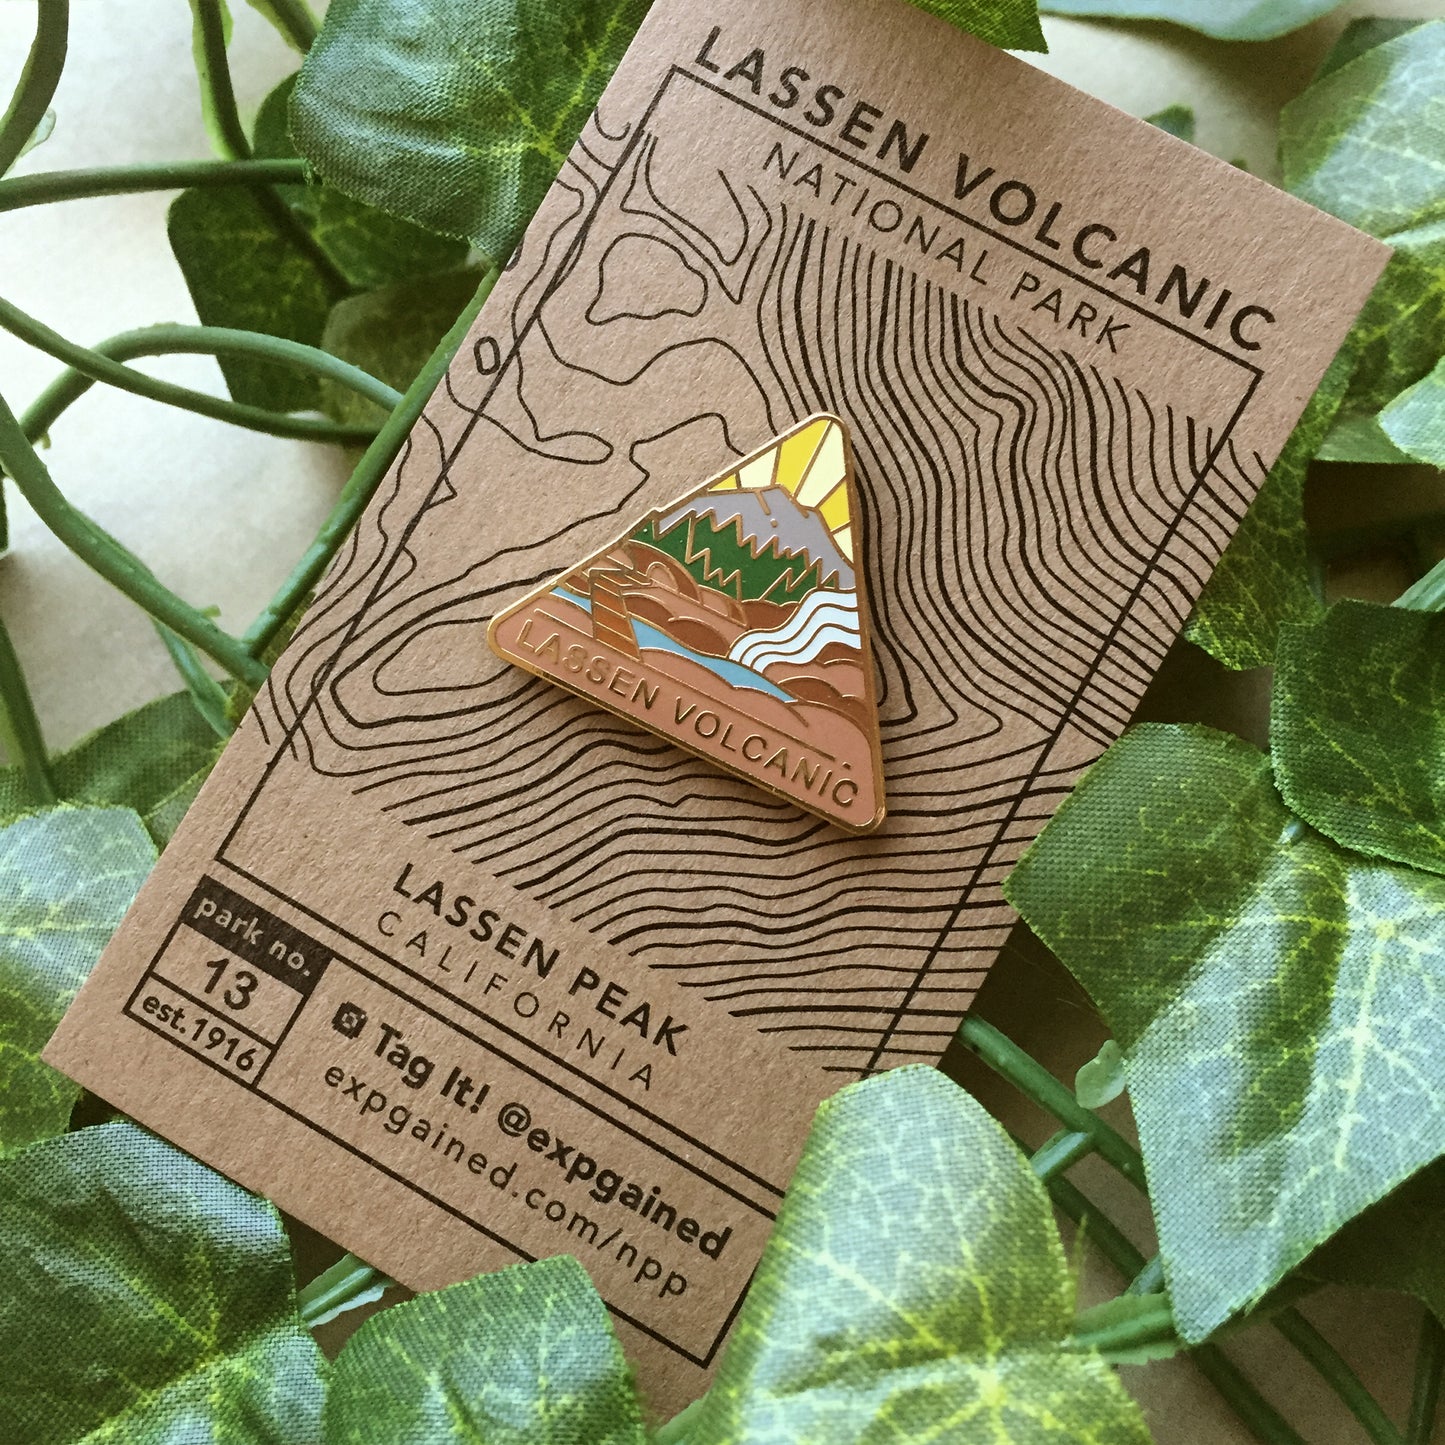 Triangle Lassen Volcanic national park enamel pin featuring a view from the beehive hike on a brown business card size backing card with a topo map of Lassen Mountain.